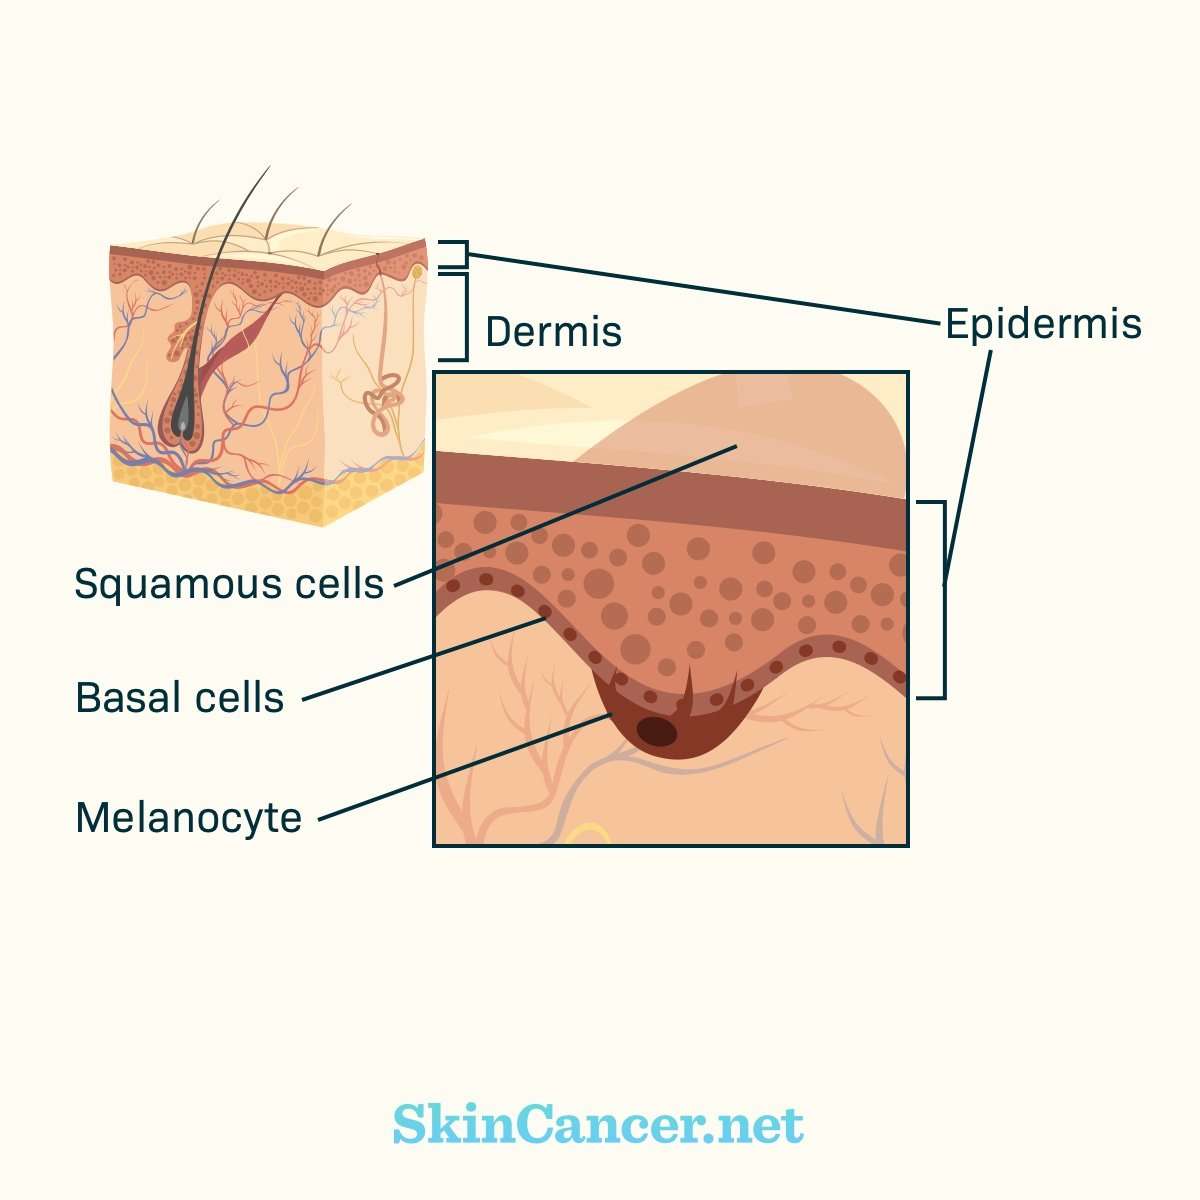 What Are the Causes of Skin Cancer?